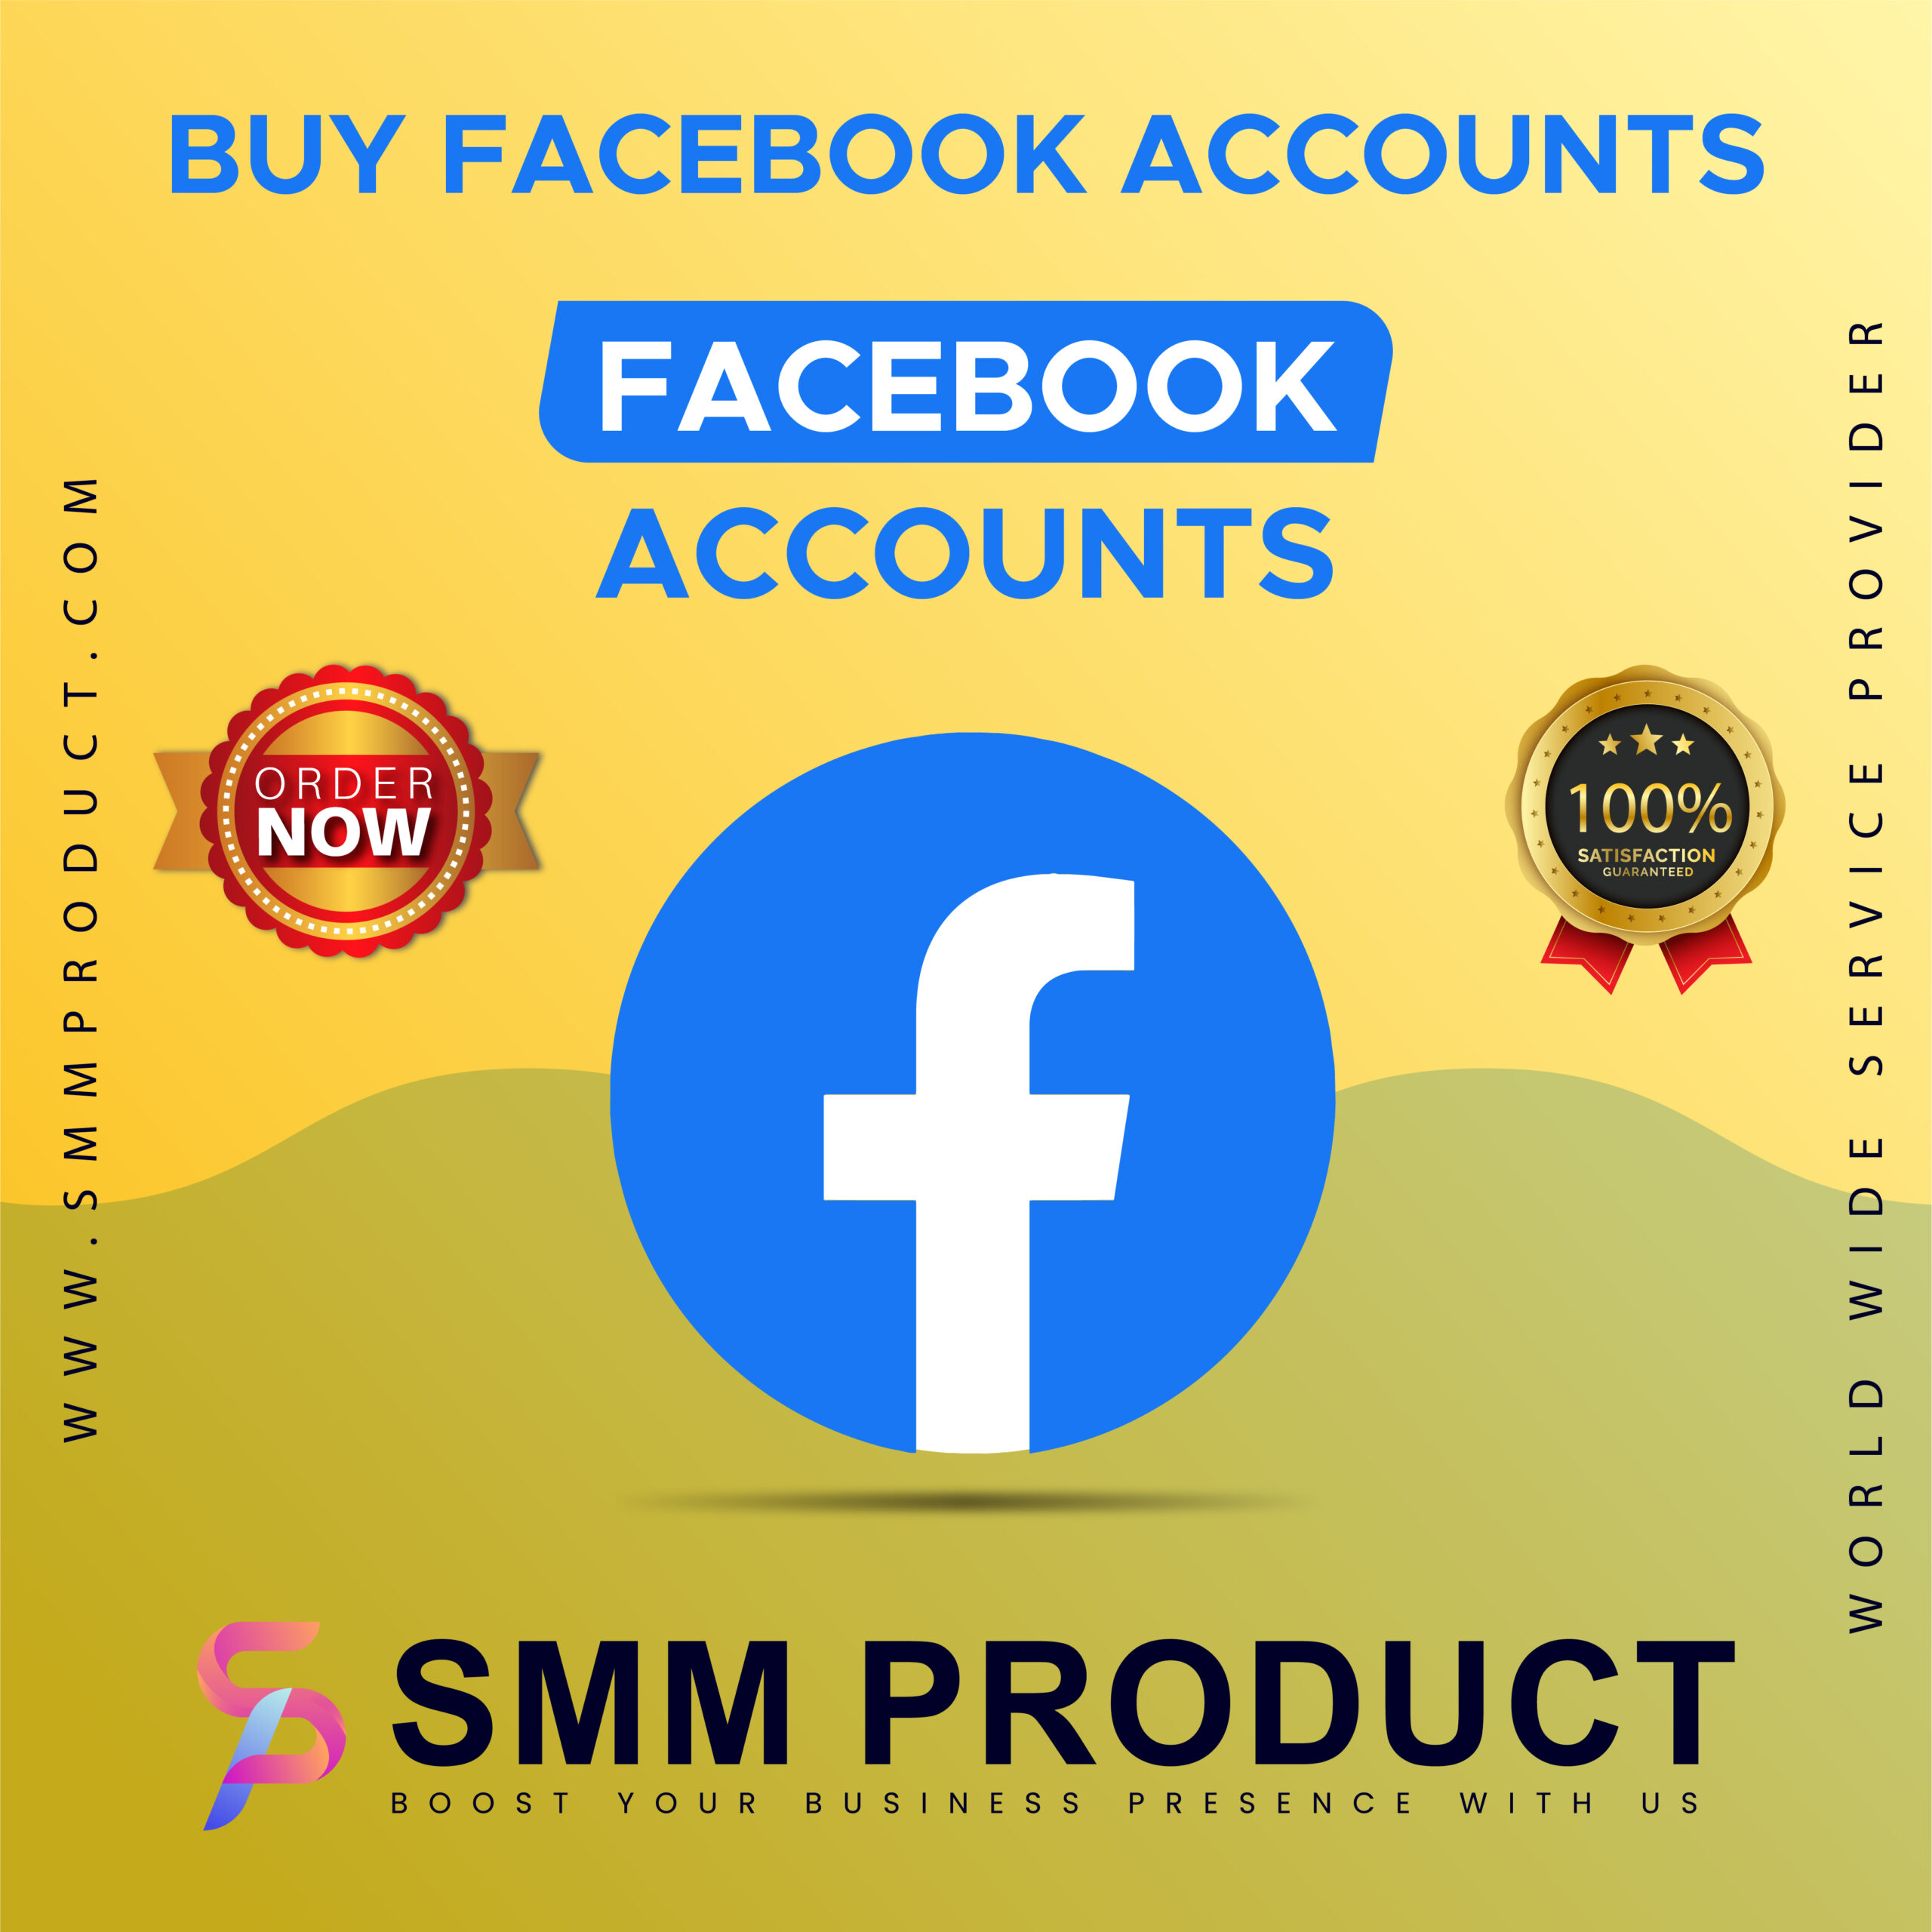 Buy Facebook Accounts - Old and High Quality Facebook...